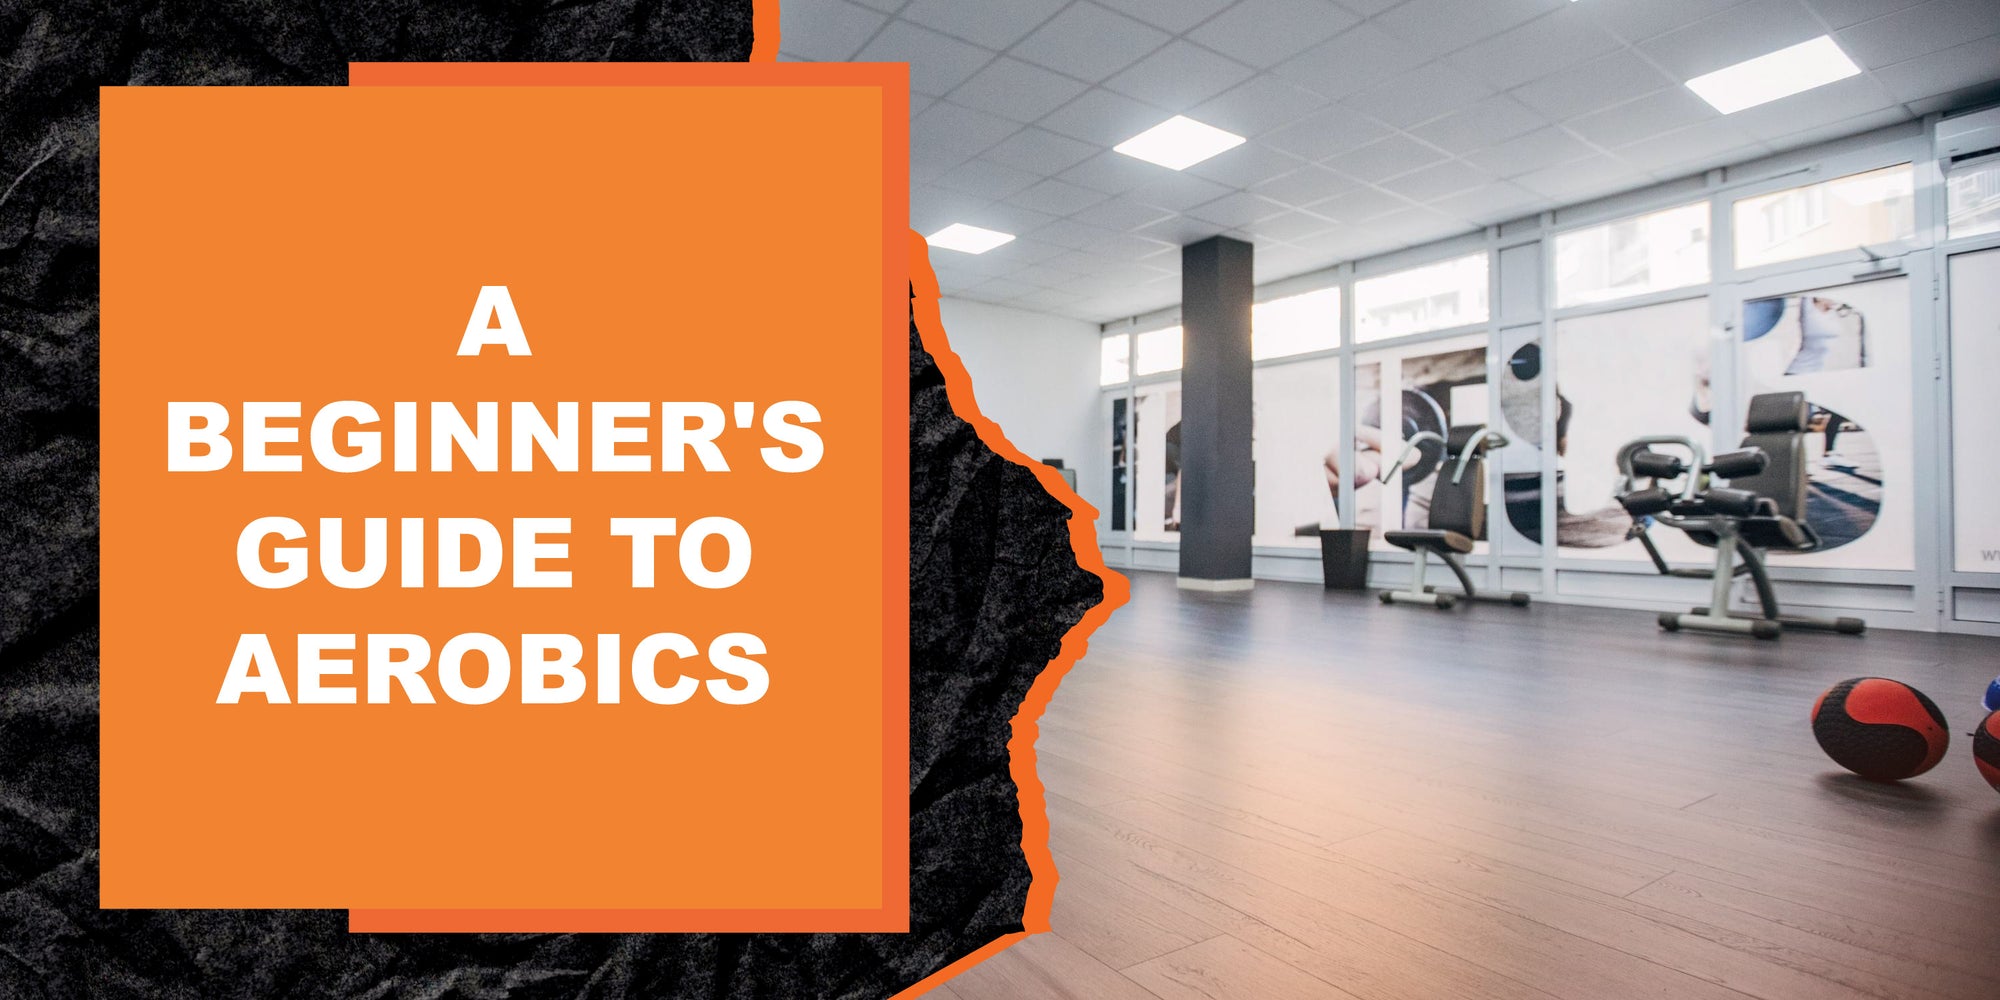 A Beginner's Guide to Aerobics